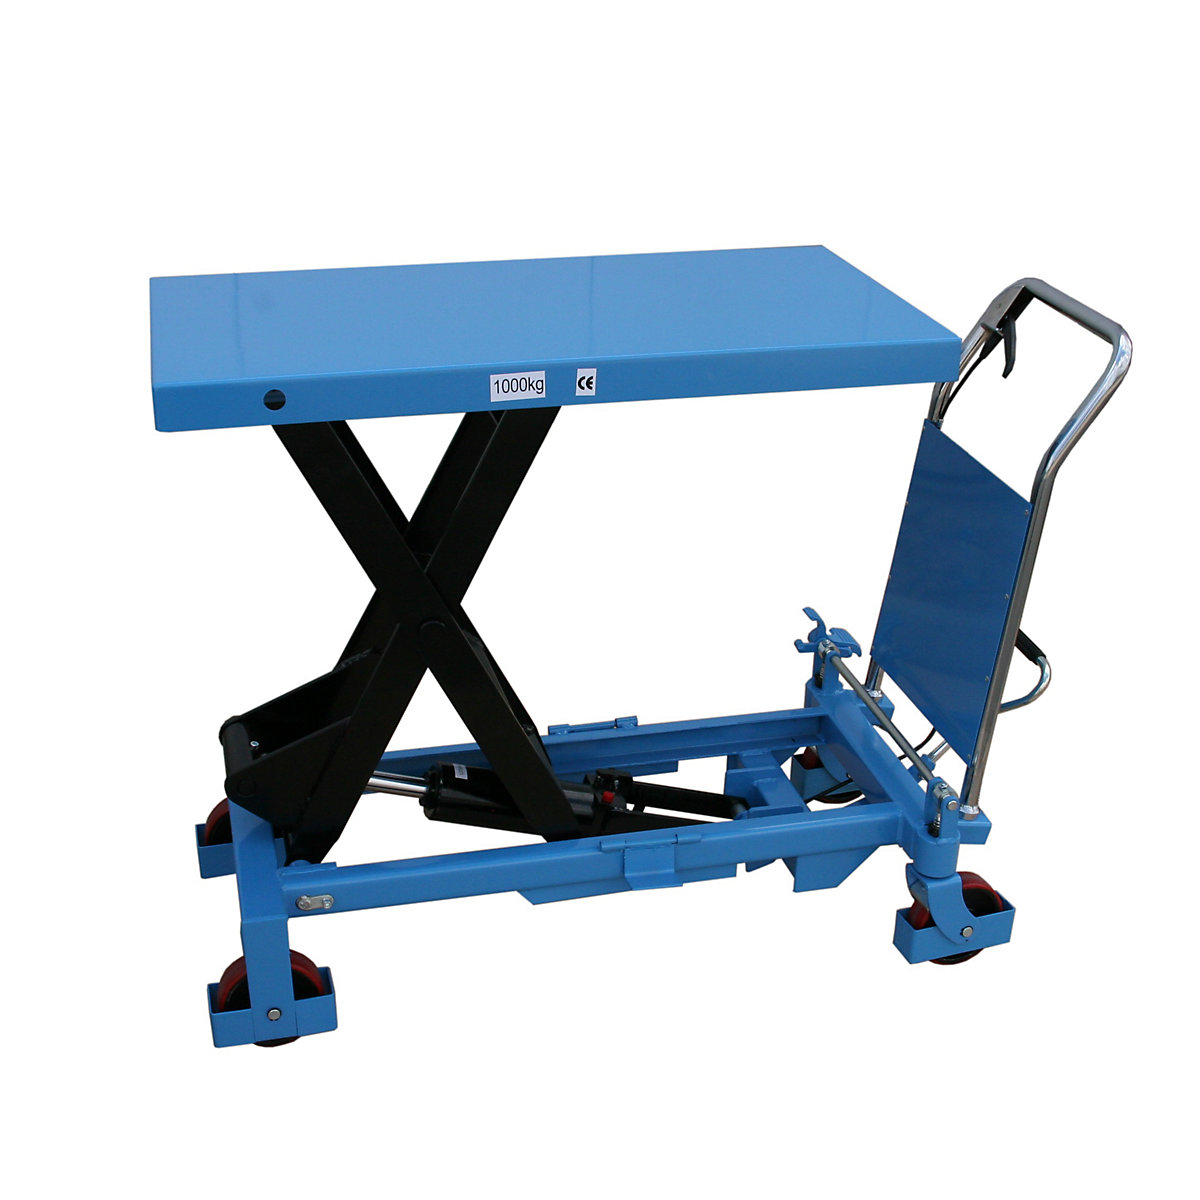 Lifting platform truck, with fixed handle, max. load 1000 kg